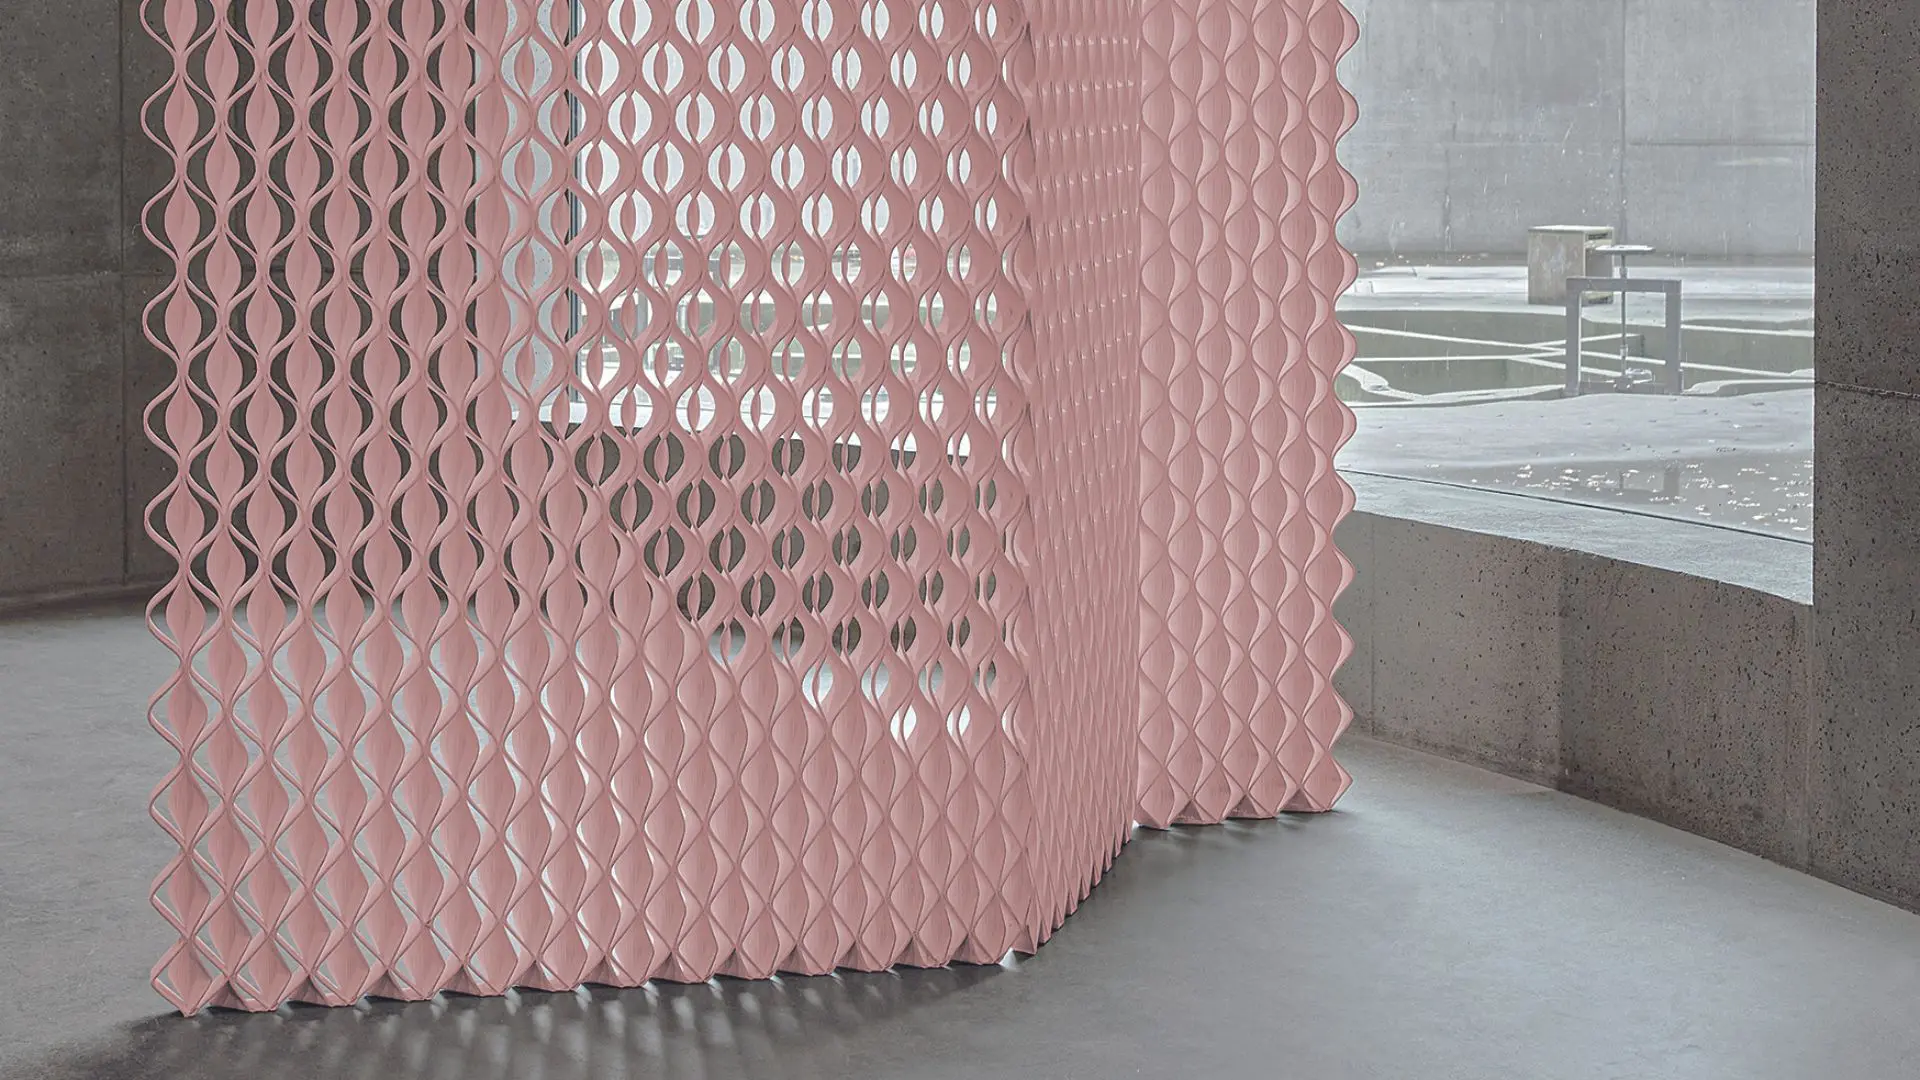 Gradient Curve Screen by House of DUS for Aectual _ milan design week _ 5vie